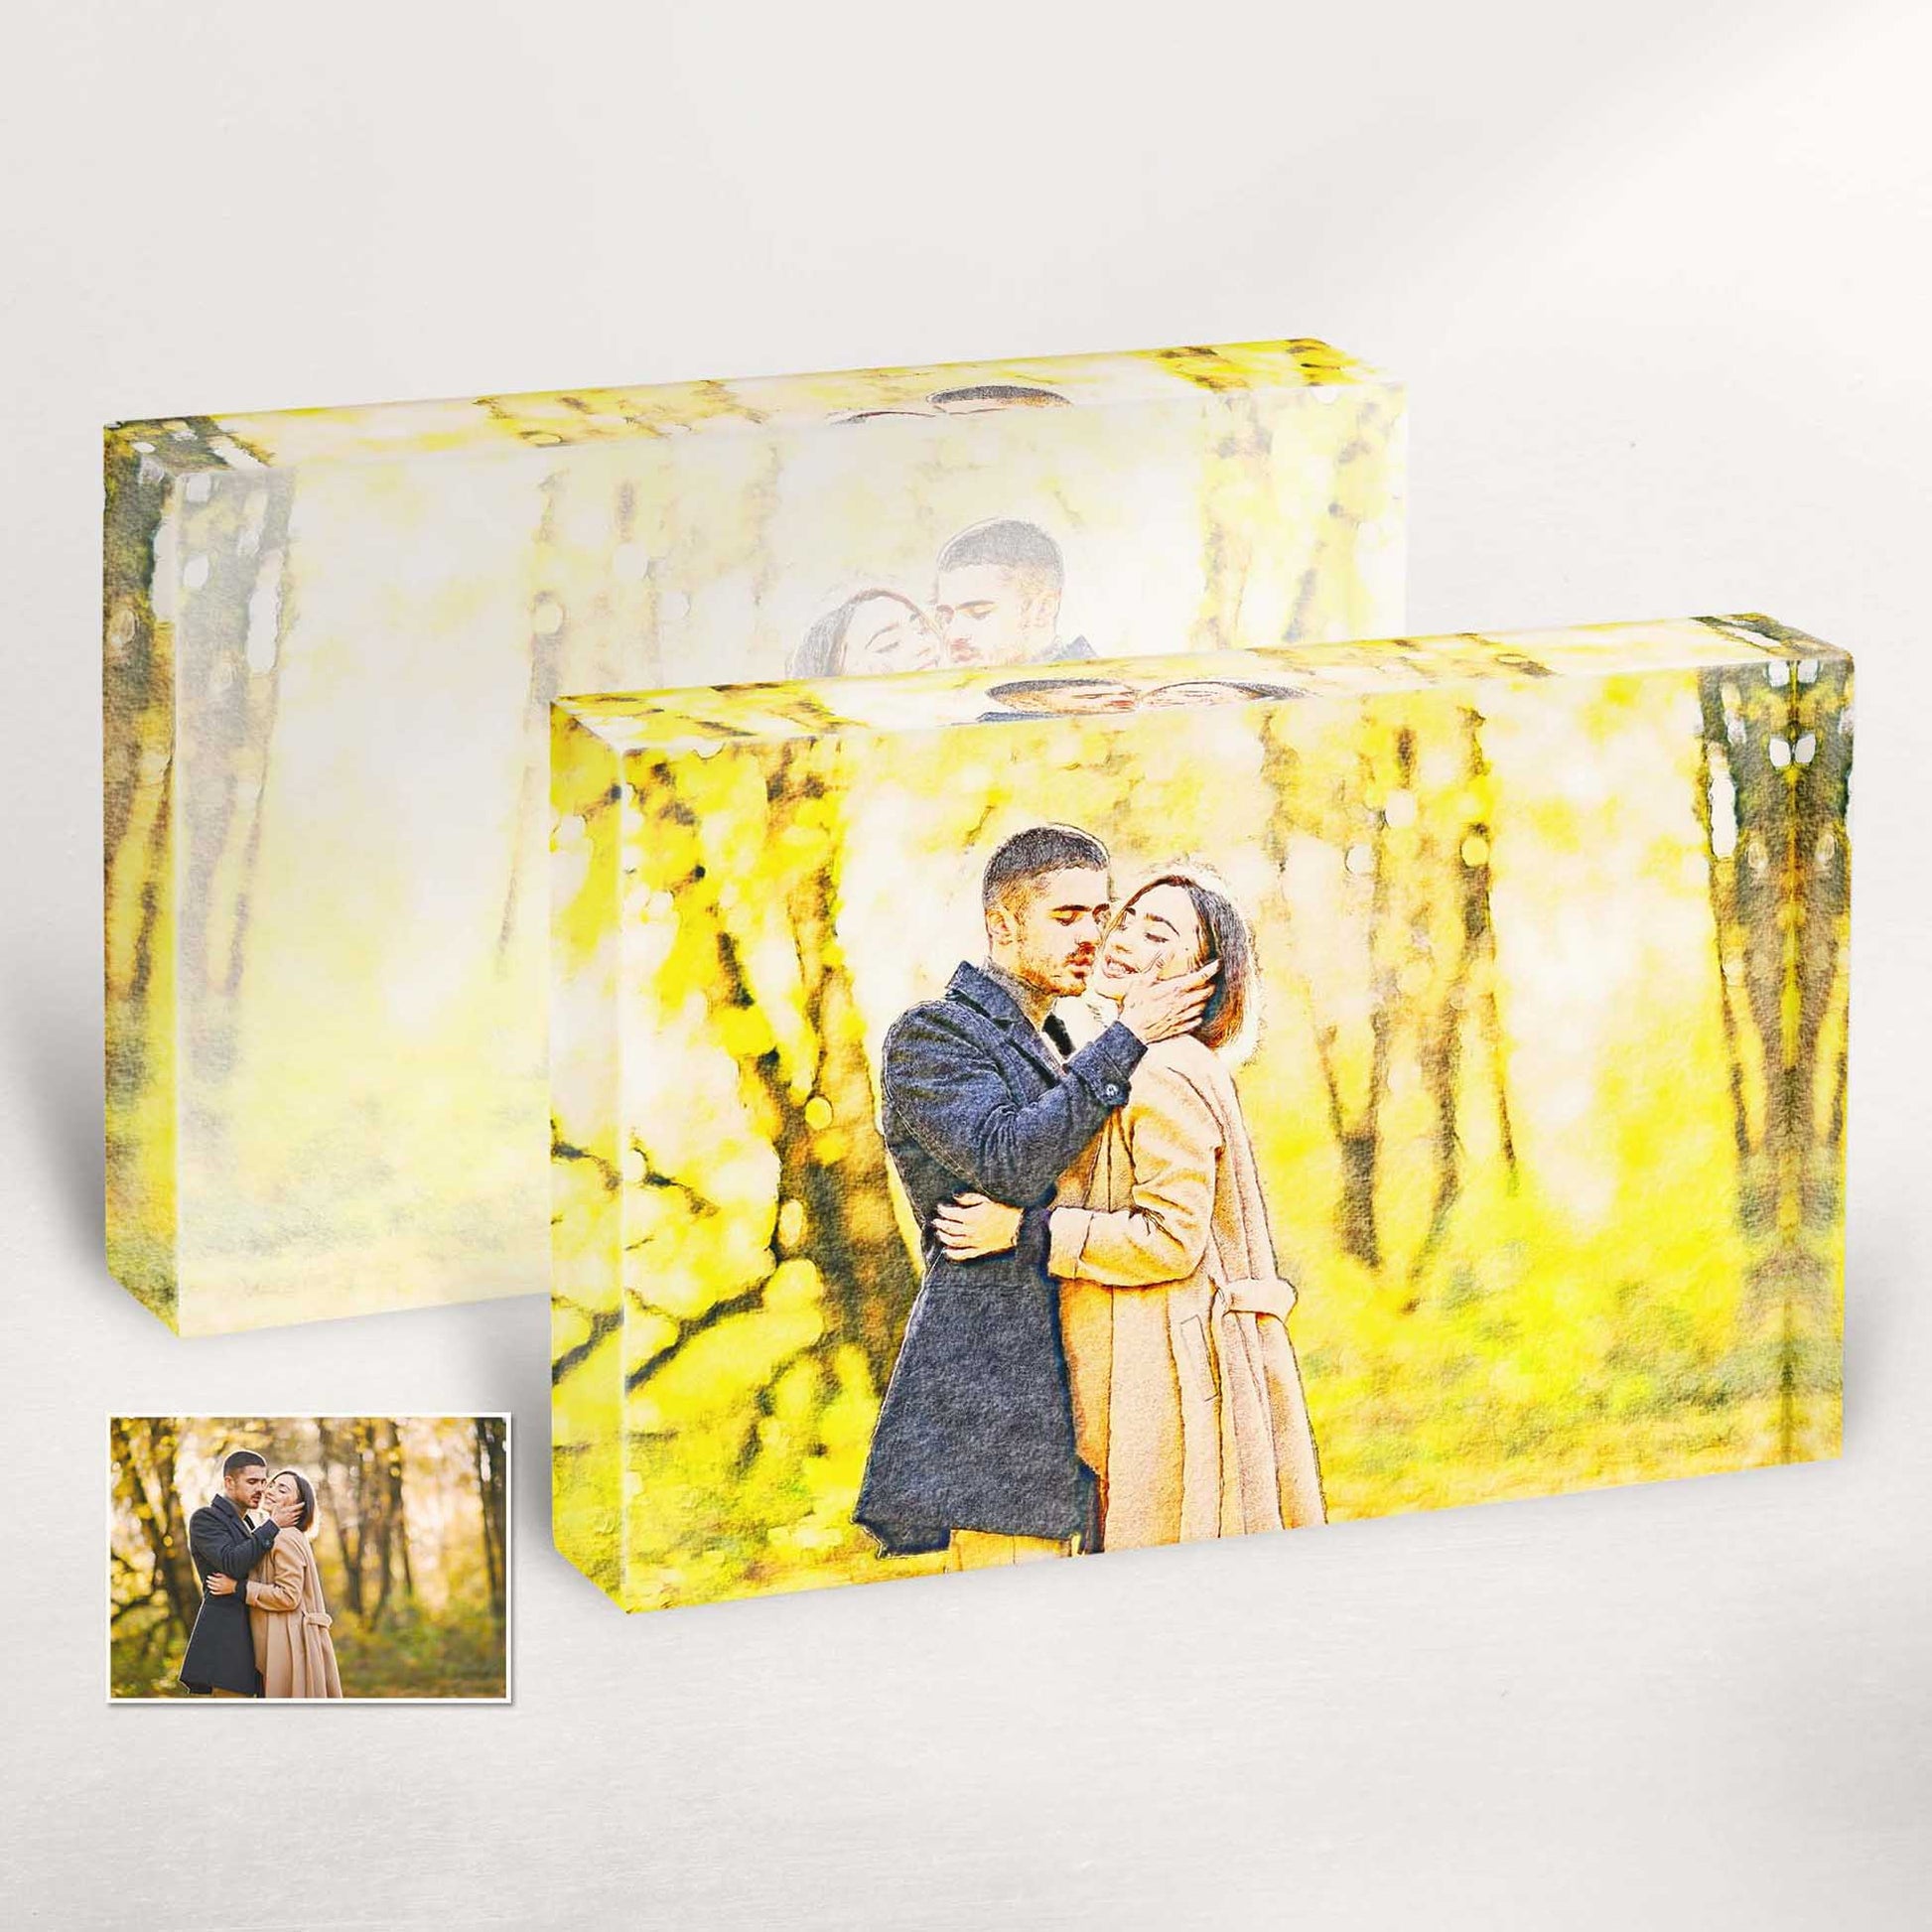 Create a visual masterpiece with our Personalised Just Watercolor Effect Acrylic Block Photo. Using your own photo, we transform it into a mesmerizing watercolor-style artwork that exudes originality